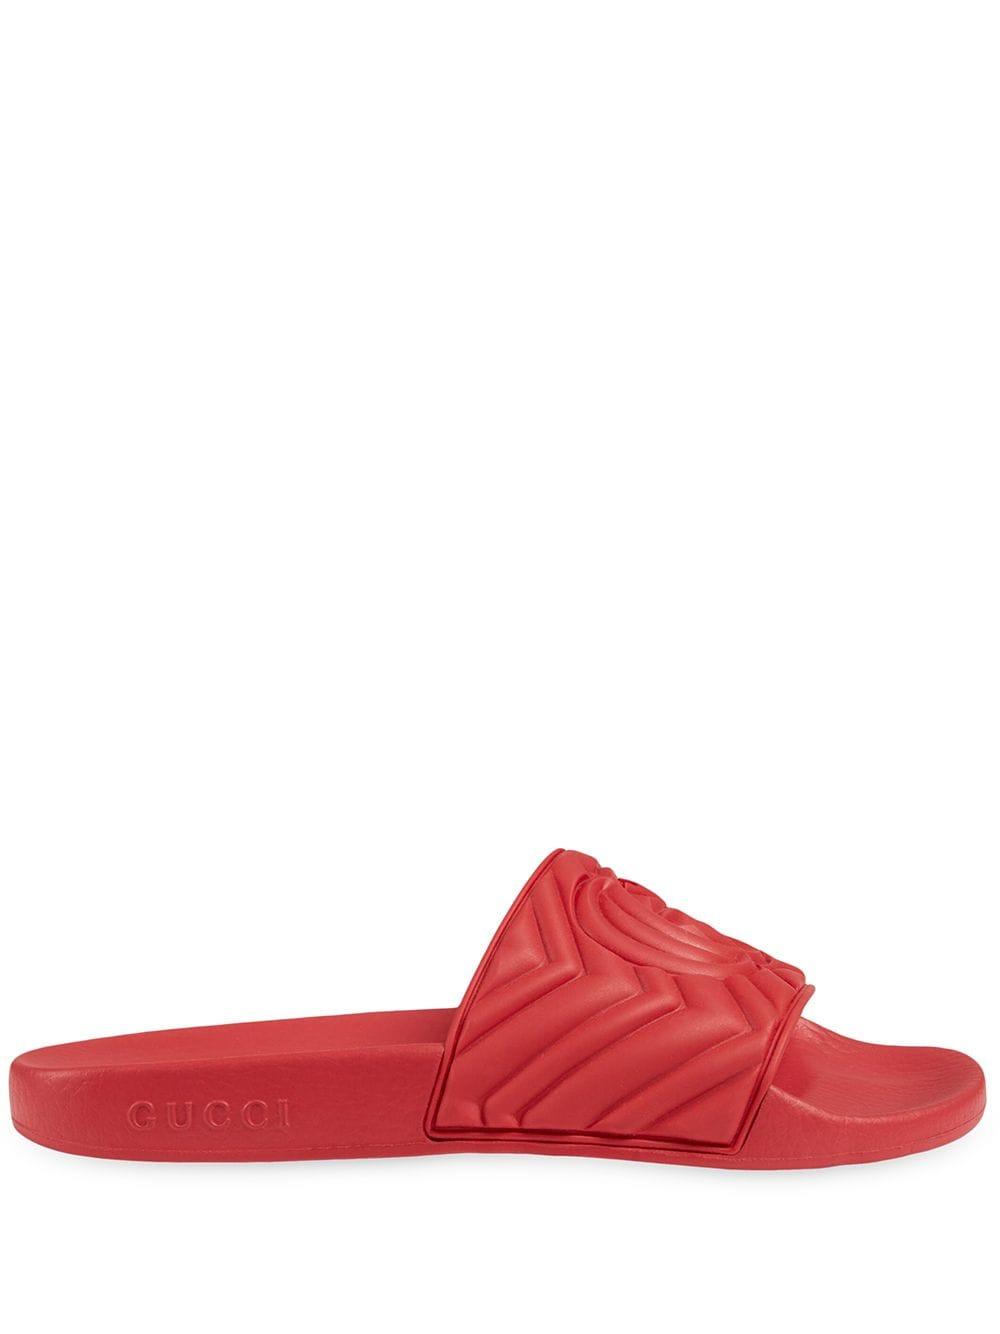 Gucci GG Matelasse Rubber Slide in Red - Save 27% - Lyst